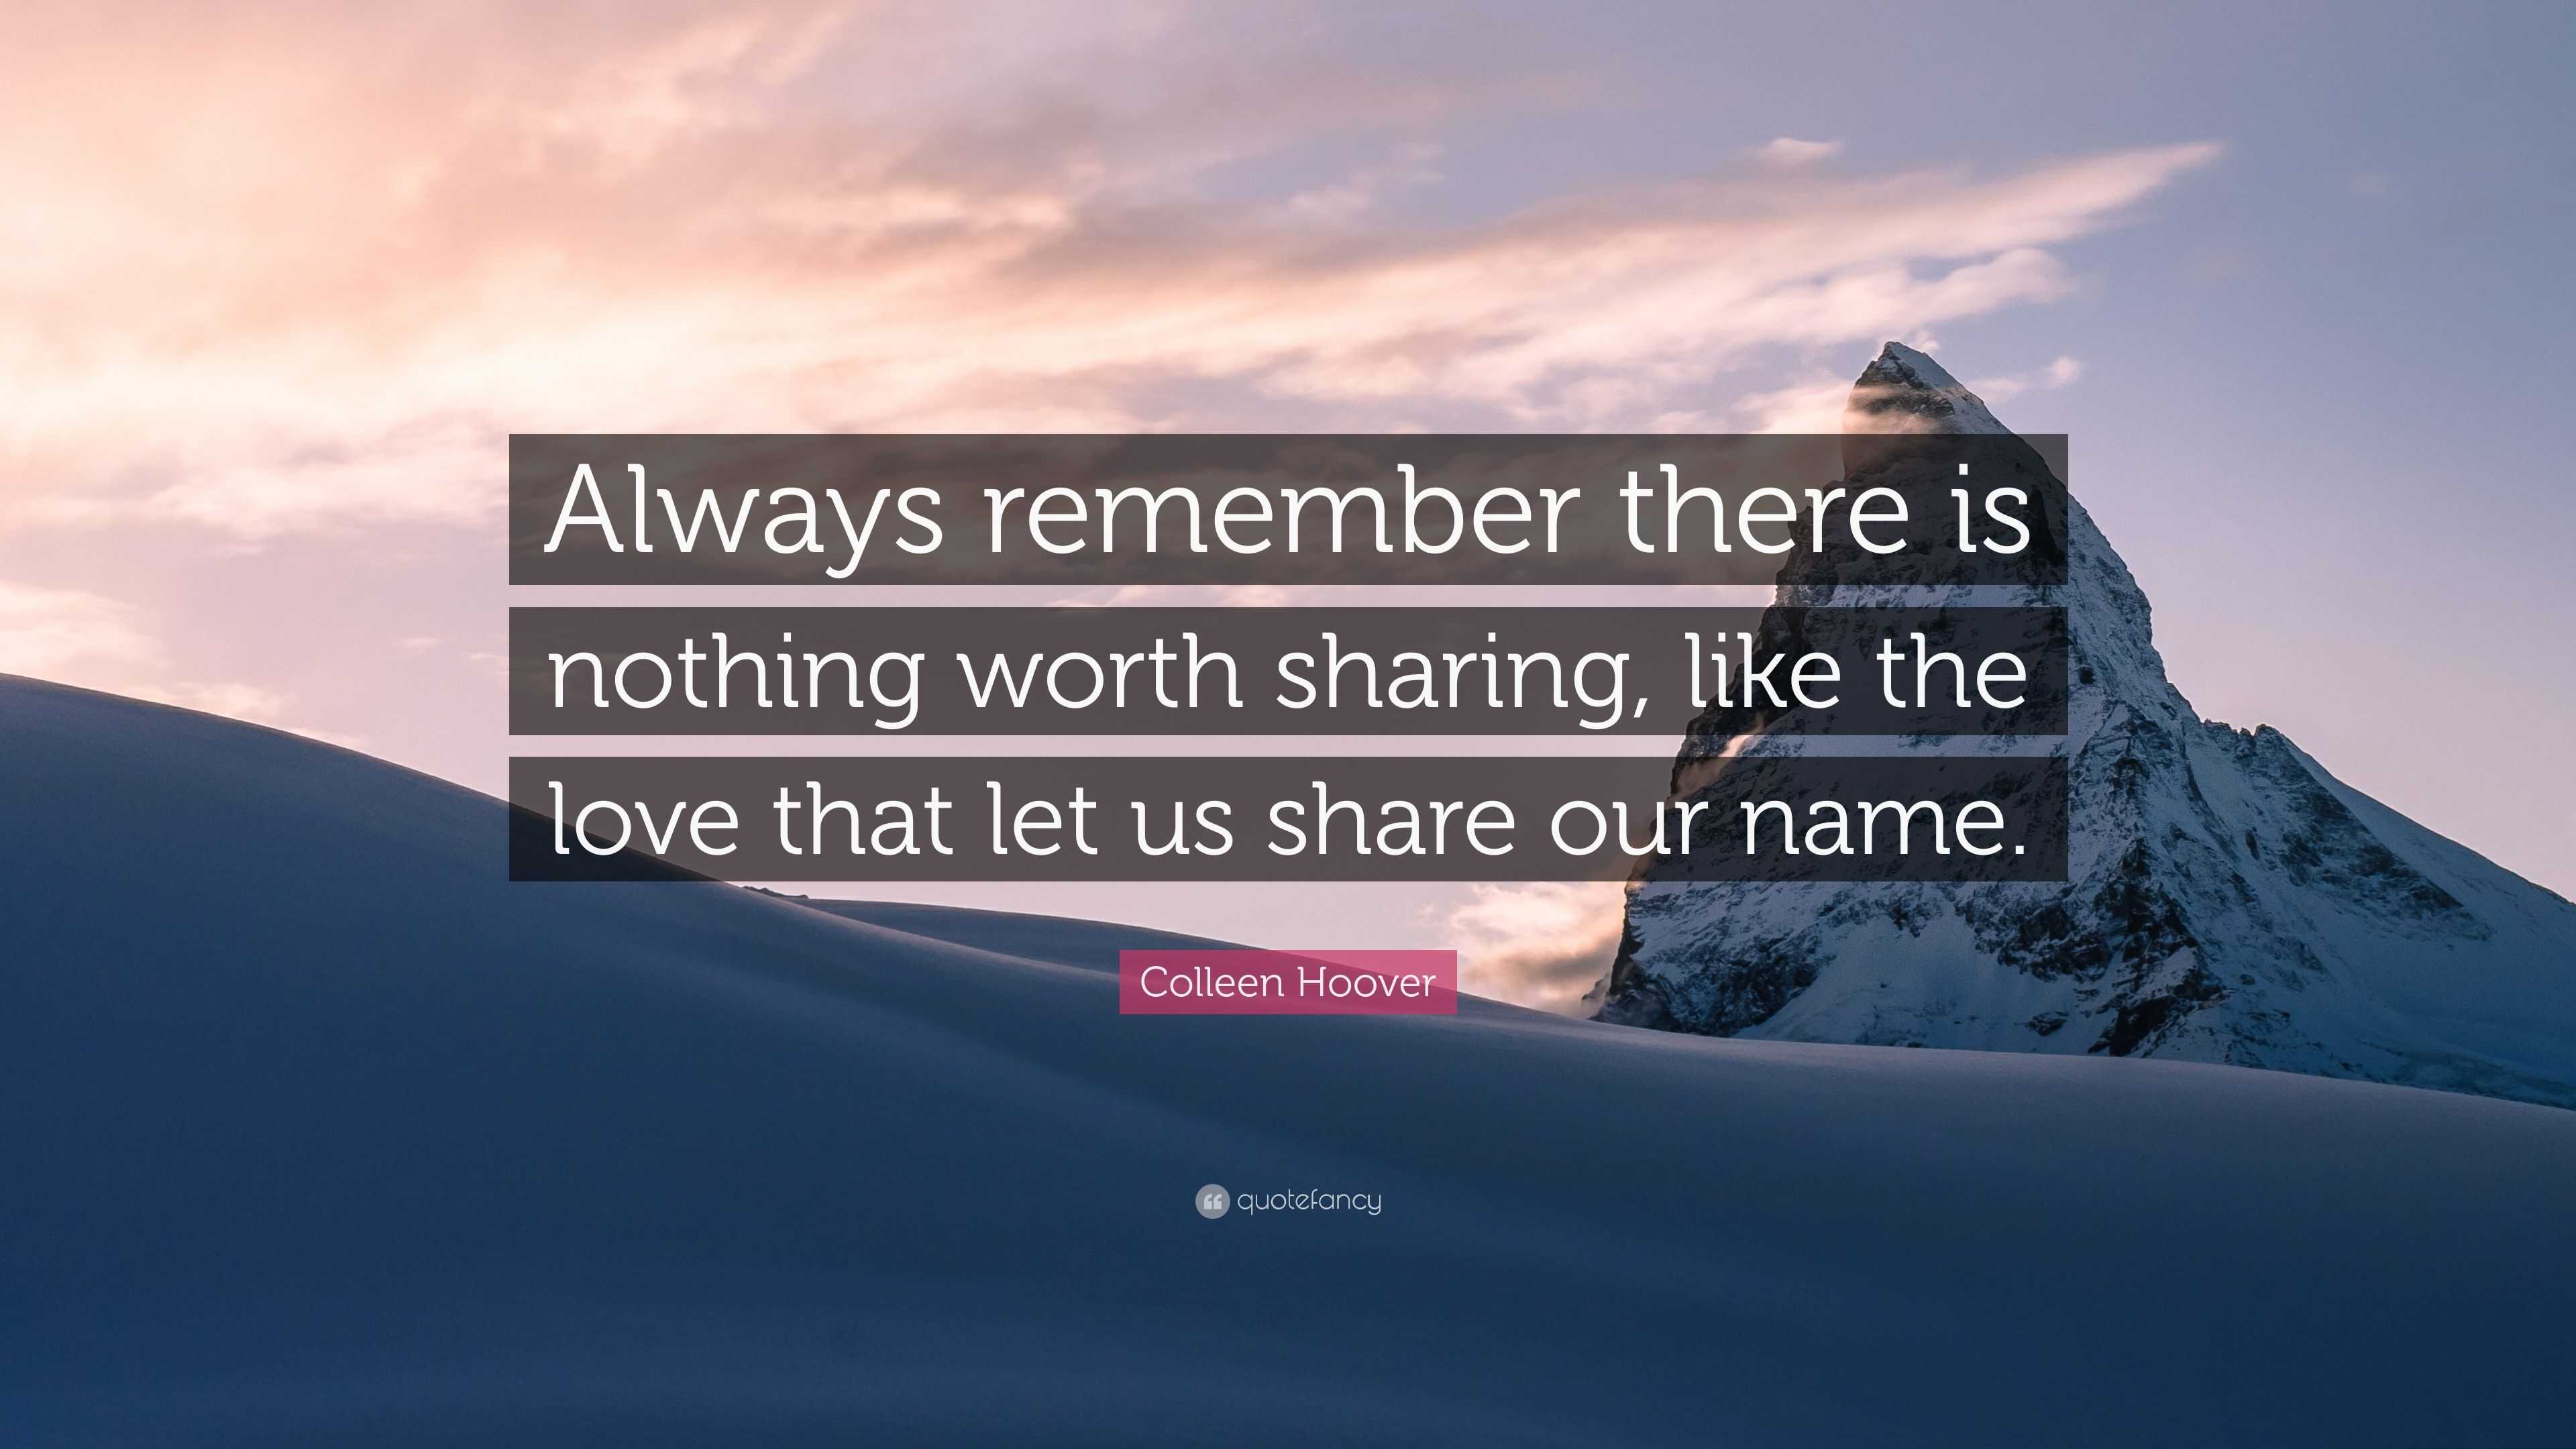 Colleen Hoover Quote “Always remember there is nothing worth sharing like the love